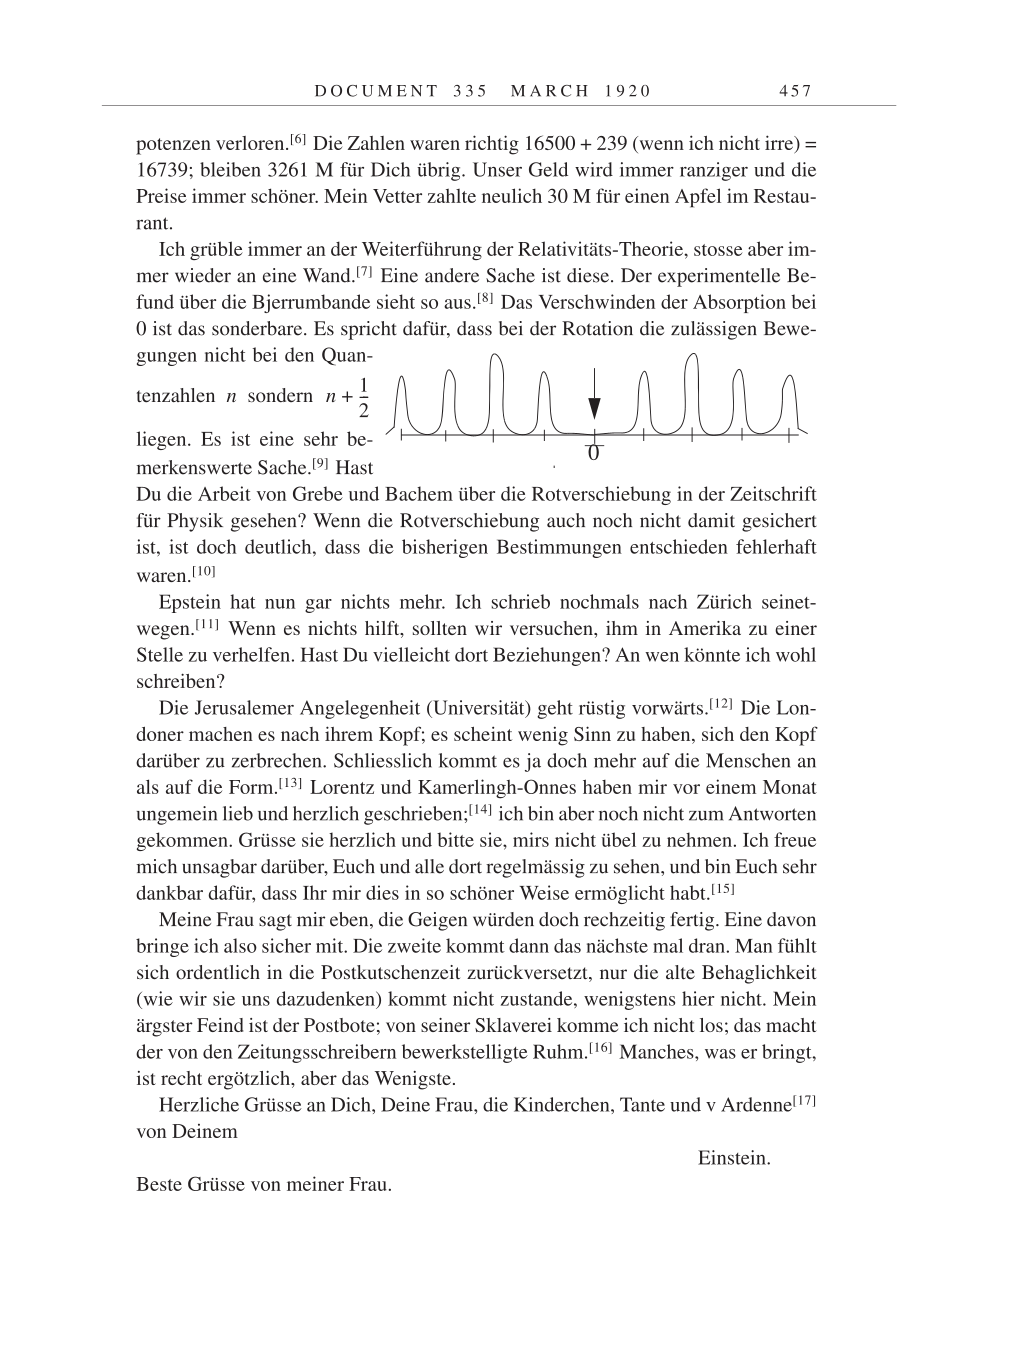 Volume 9: The Berlin Years: Correspondence January 1919-April 1920 page 457